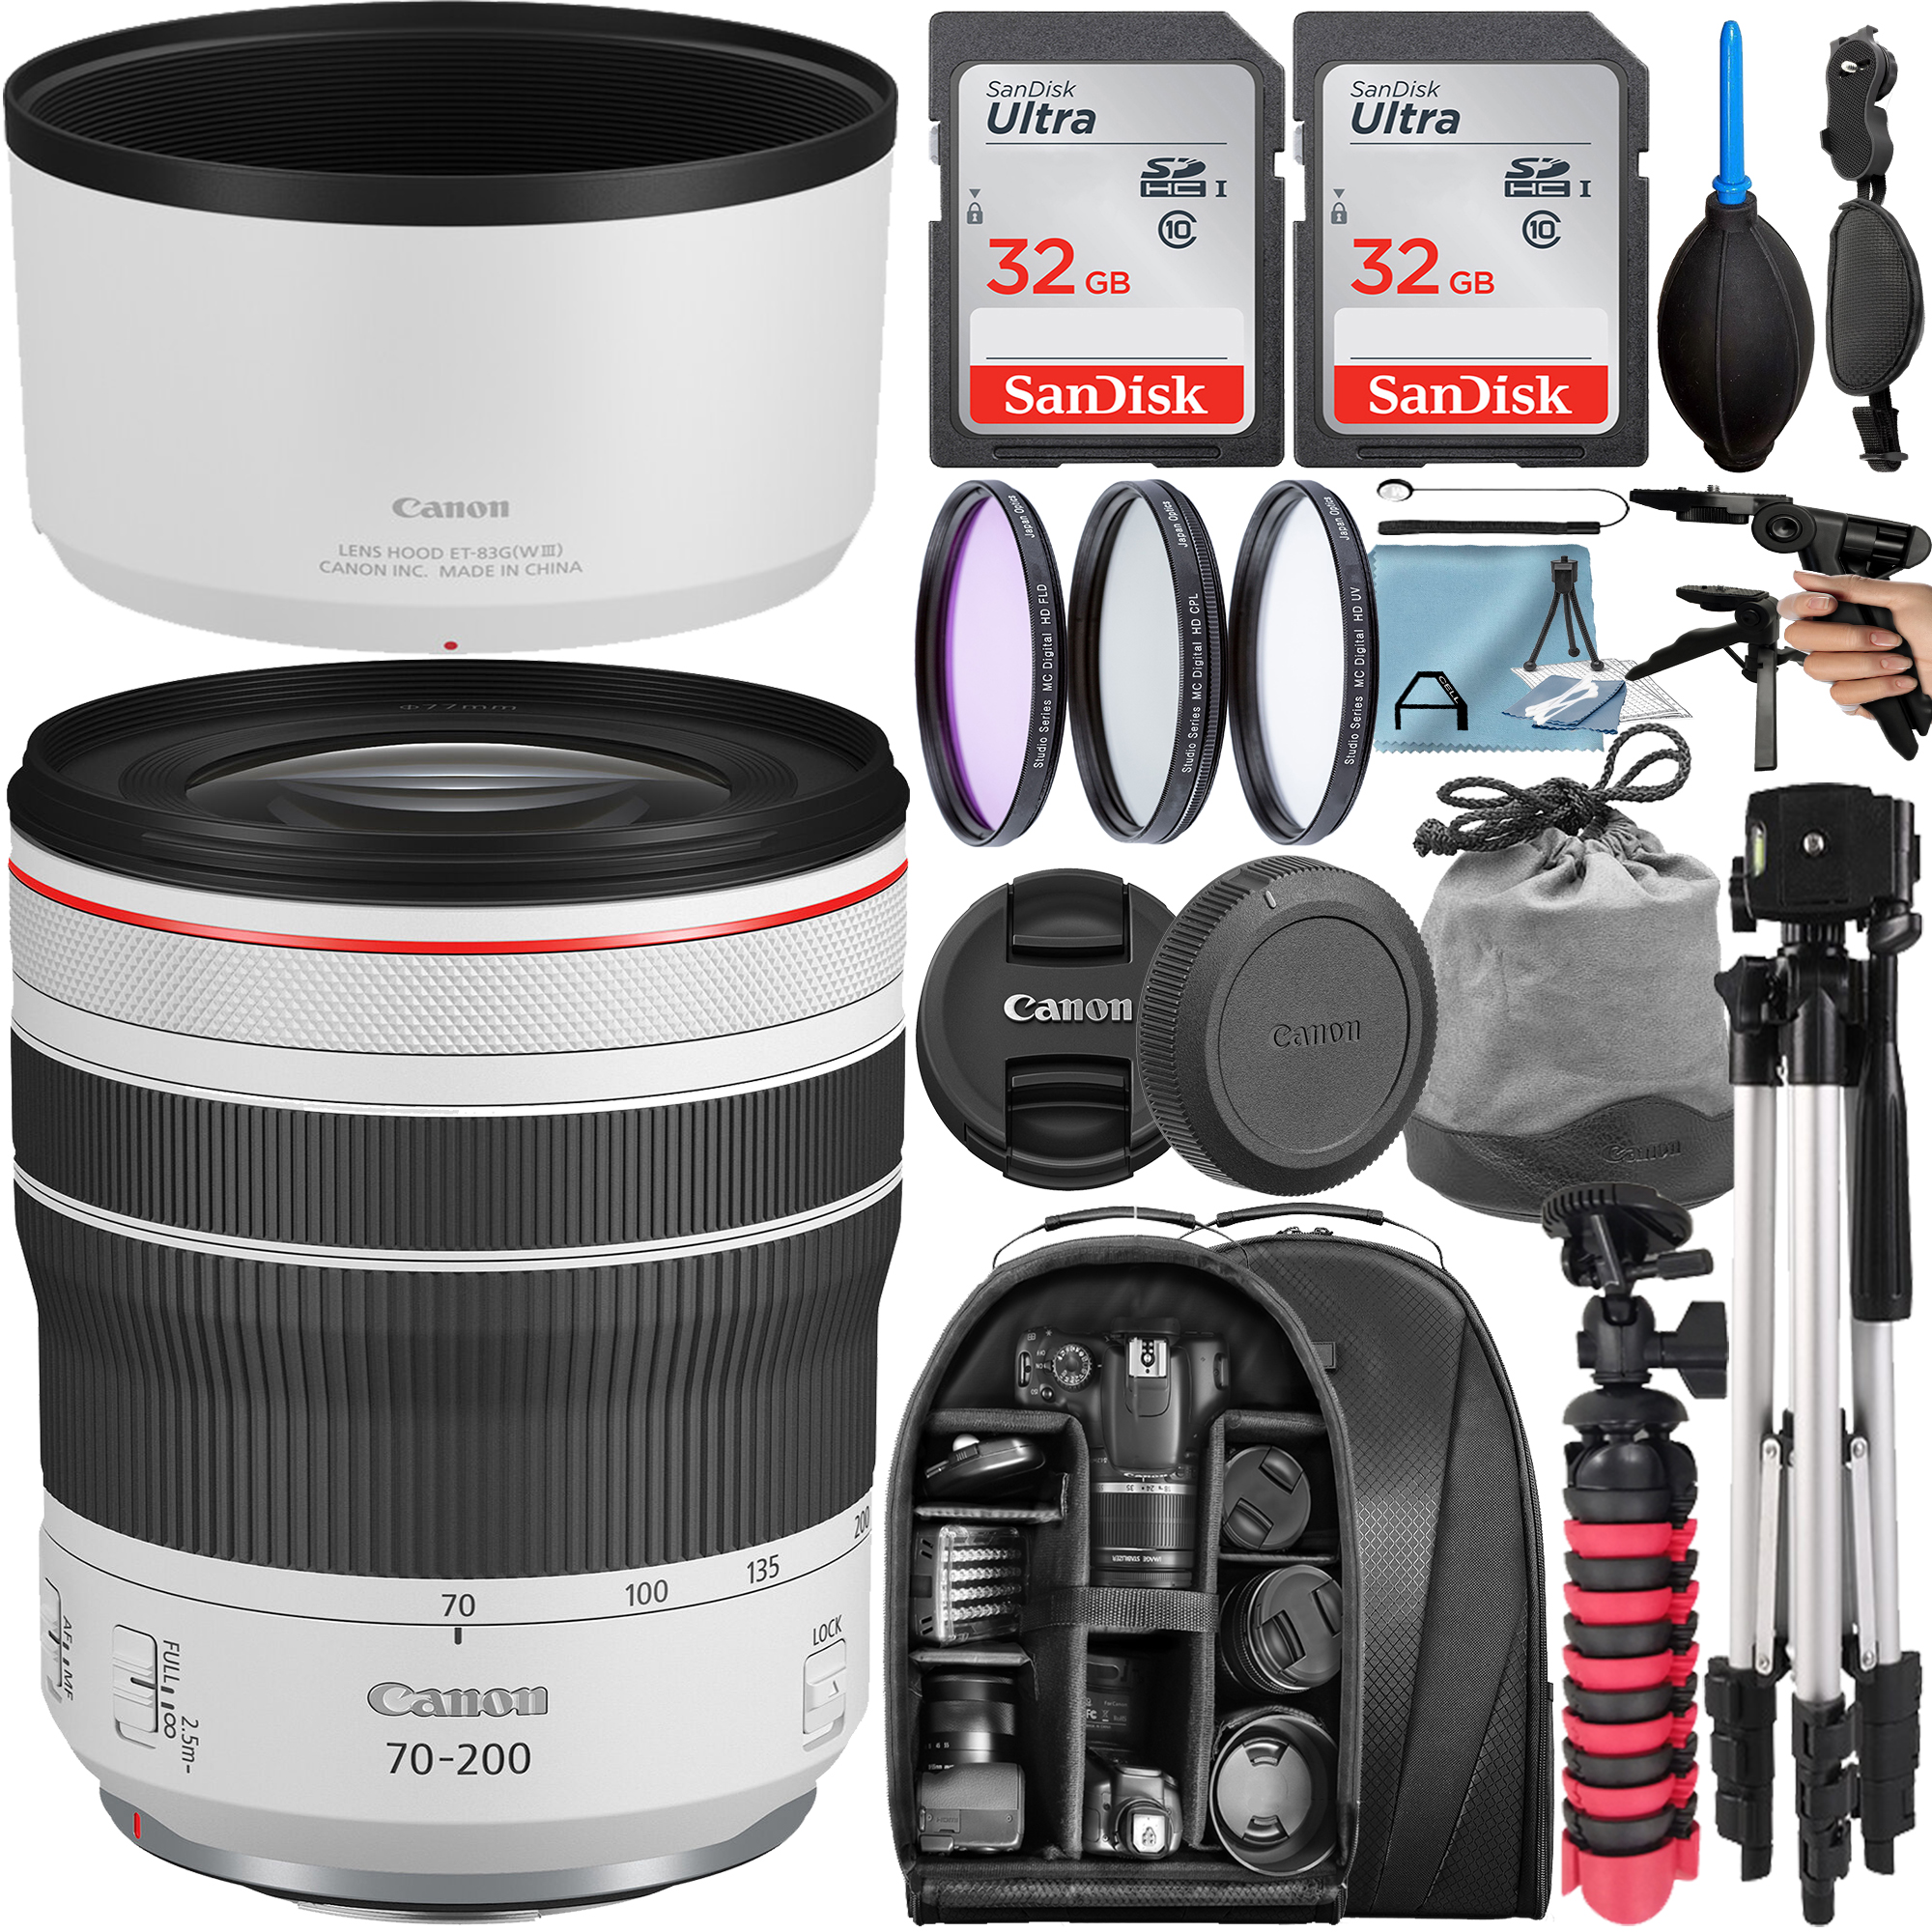 Canon RF 70-200mm F/4L IS USM Telephoto Zoom Lens with 2 Pack 32GB SanDisk Memory Card + Tripod + Backpack + A-Cell Accessory Bundle